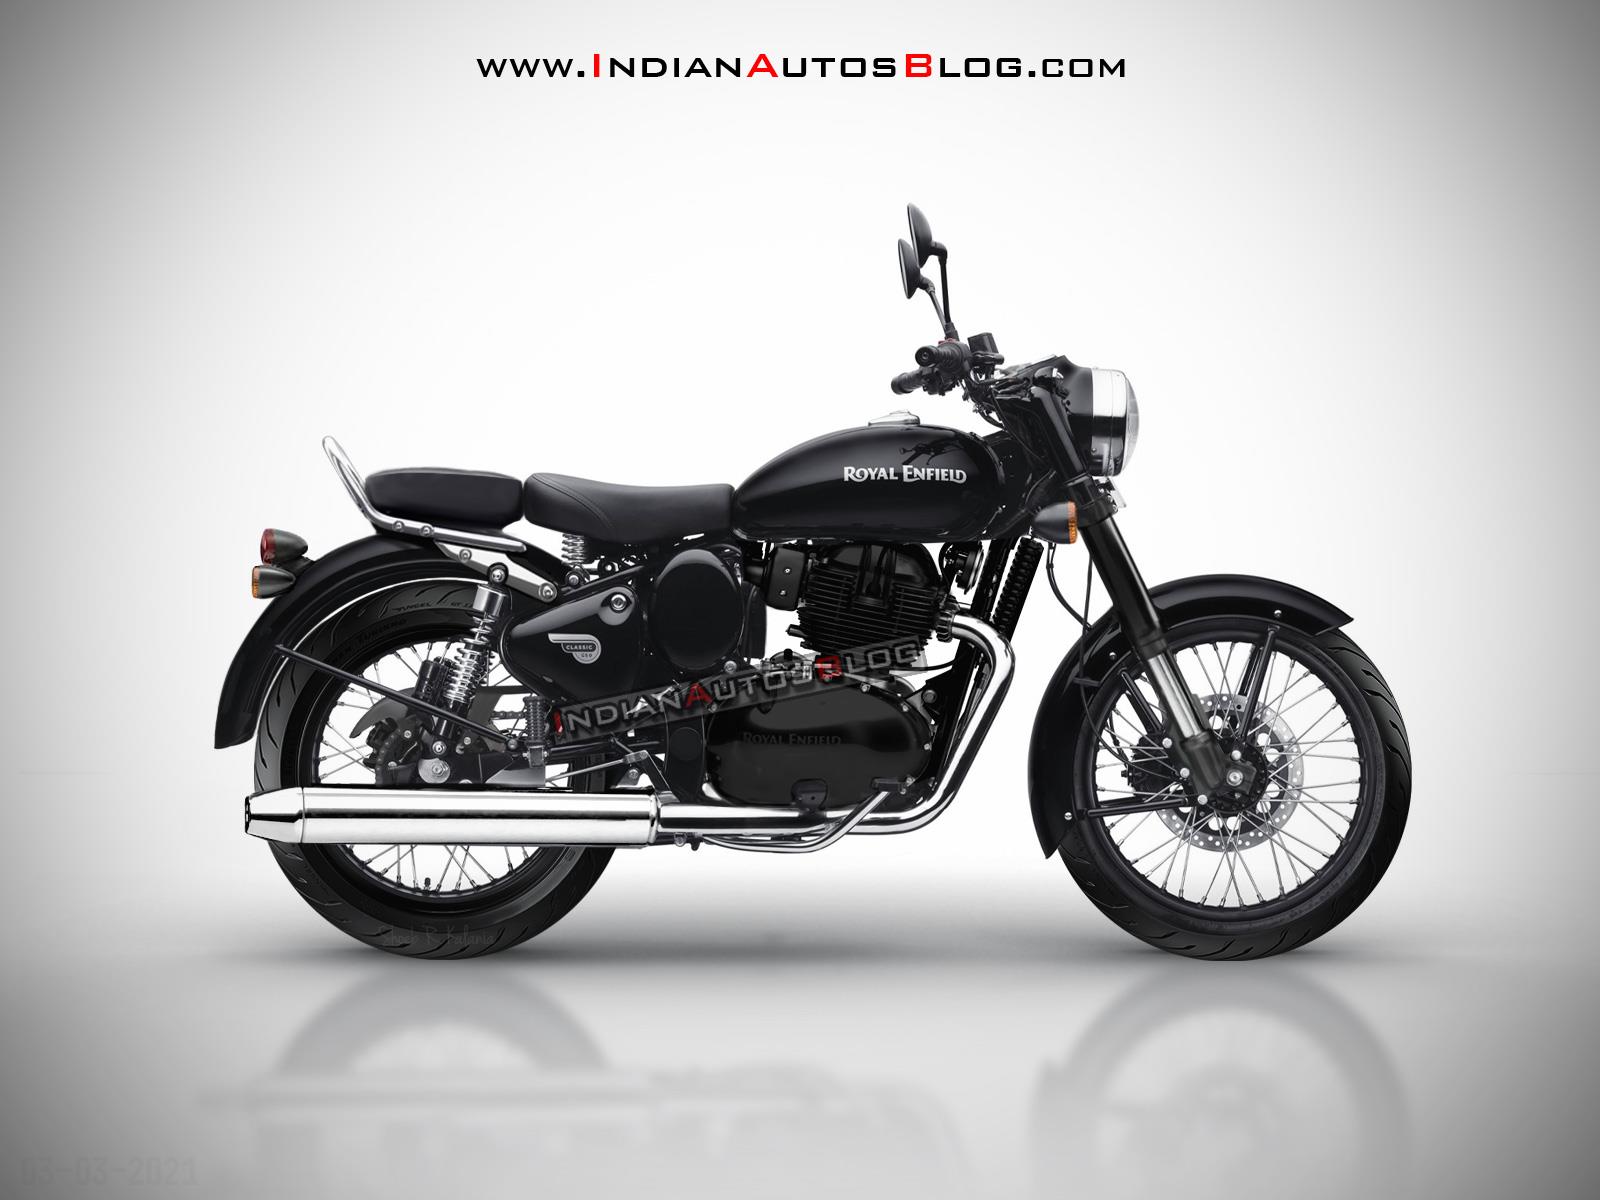 2022 Royal Enfield Classic 650 Specifications and Expected Price in India